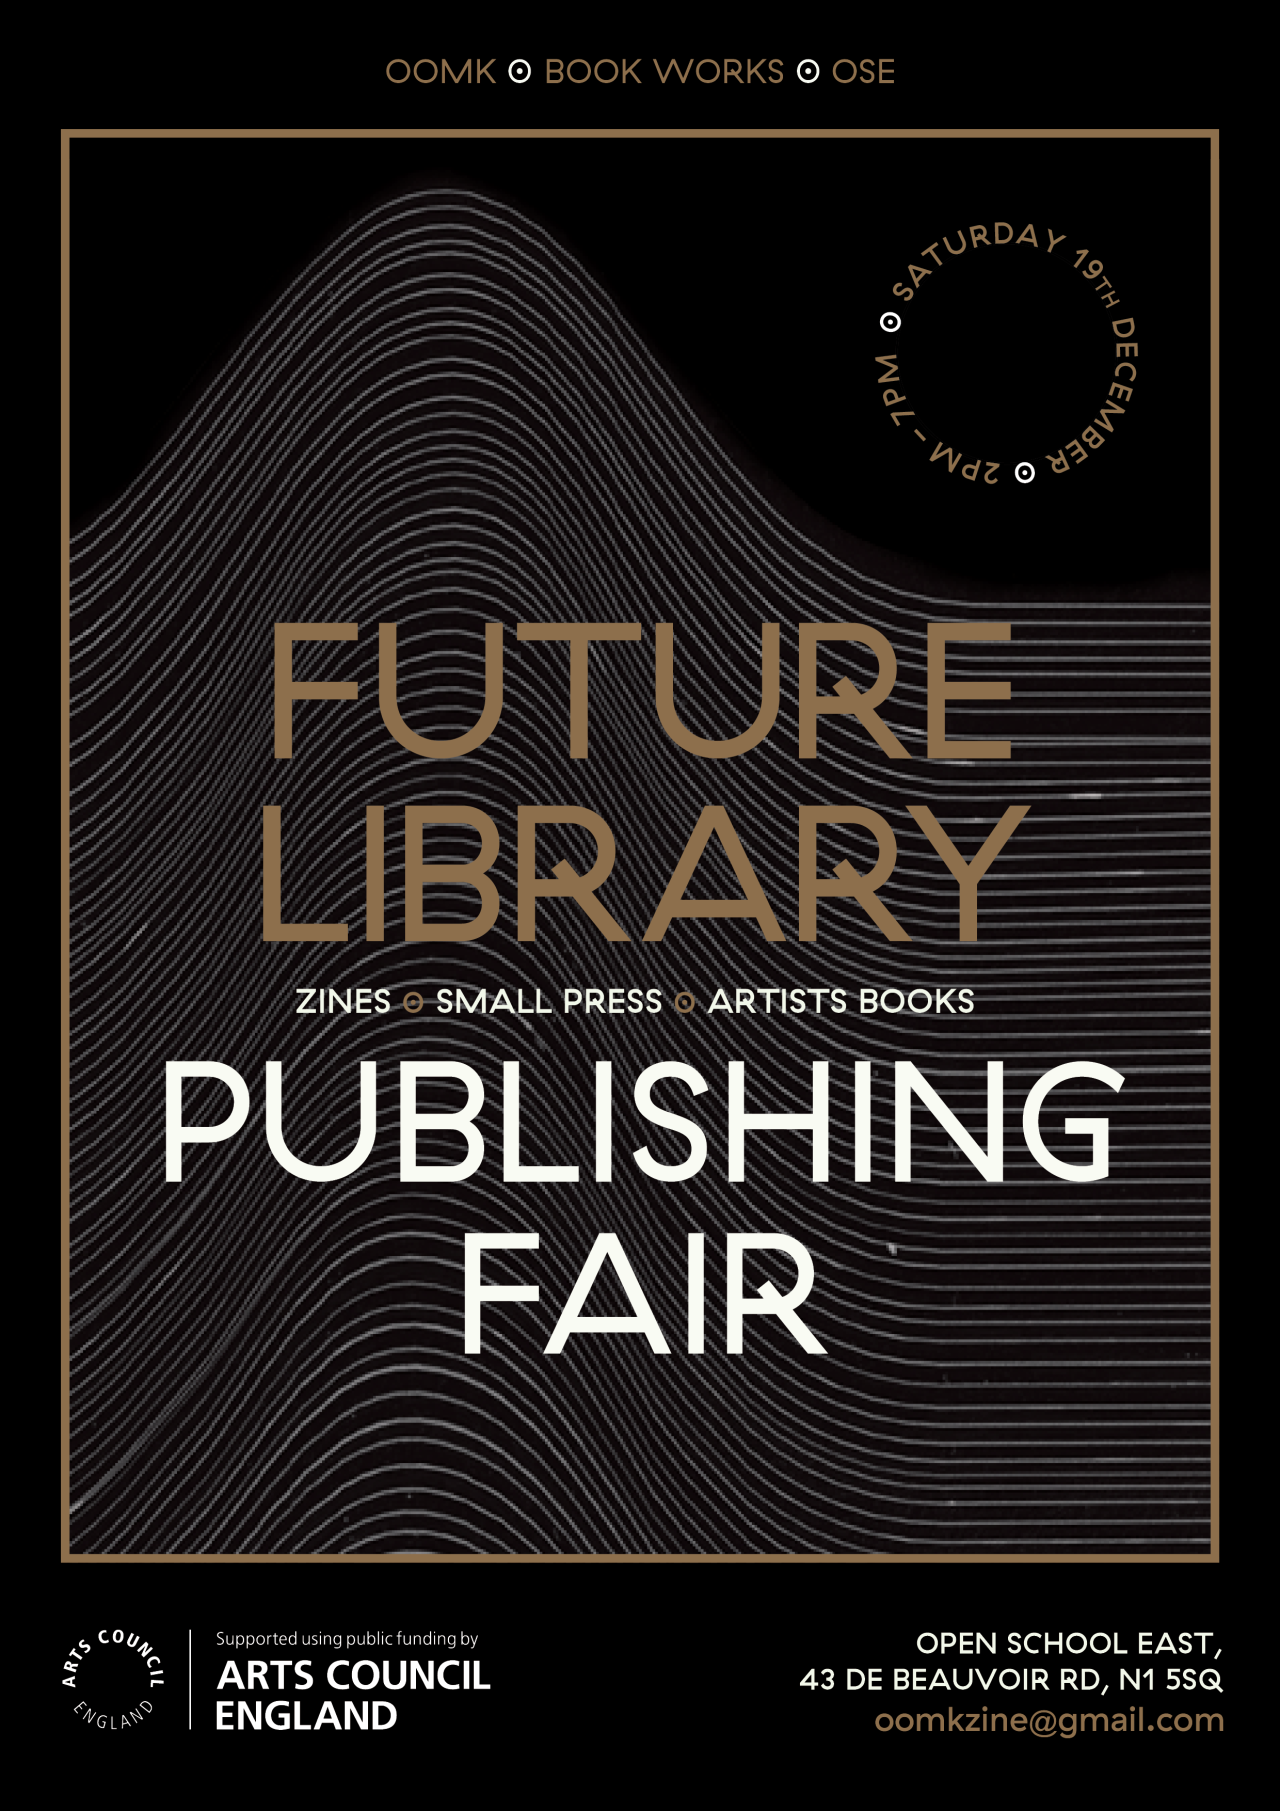 Publishing Fair, hosted by OOMK2-7pm, 19 December 2015 at Open School East 43 De Beauvoir Rd, London N1 5SQOOMK is organising a small press & zine fair at OSE - featuring over 40 small publishers and zine stalls. There will be work for sale as well as reference displays of zines and artists’ book collections. Stalls are free but each stall holder will be required to donate a zine or book to OOMK’s Future Library project for OSE.Full list of exhibitors: OOMKBook WorksOSEAbondance MatandaAmeena KhanAuthorrisingBackwards BurdBanner Repeater Brigid DeaconBritish ValuesCentrala UKChloe SpicerClod MagazineCool Schmool ZinesCrowd TalksDaniel WilkinsonDead Trees and DyeDecadence ComicsDifferent SkiesGirls ClubInland EditionsJacob LewisJacob V JoyceLadette SpaceLondon Centre for Book ArtsMark PawsonNumbiPaperWork MagazinePublication Studio LondonReena MakwanaROADFEMMERudy LoeweSALTSamra SaidSpiralboundSTRIKE!Sorryyoufeeluncomfortable Tiny Pencil and Amber HsuTypical Girls MagazineVampire Sushi Distro Ione Gamble Lindsay Draws / Riso Print Club at Common HouseAND publishingOdd One OutOther AsiasJohn Lawrence+ communal table (bring your zines on the day!)There will be a FREE communal table for people with one-off zines to sell. Bring your zines on the day!More info about the residency: http://oomk.net/post/132214925839/press-release-were-delighted-to-announce-that